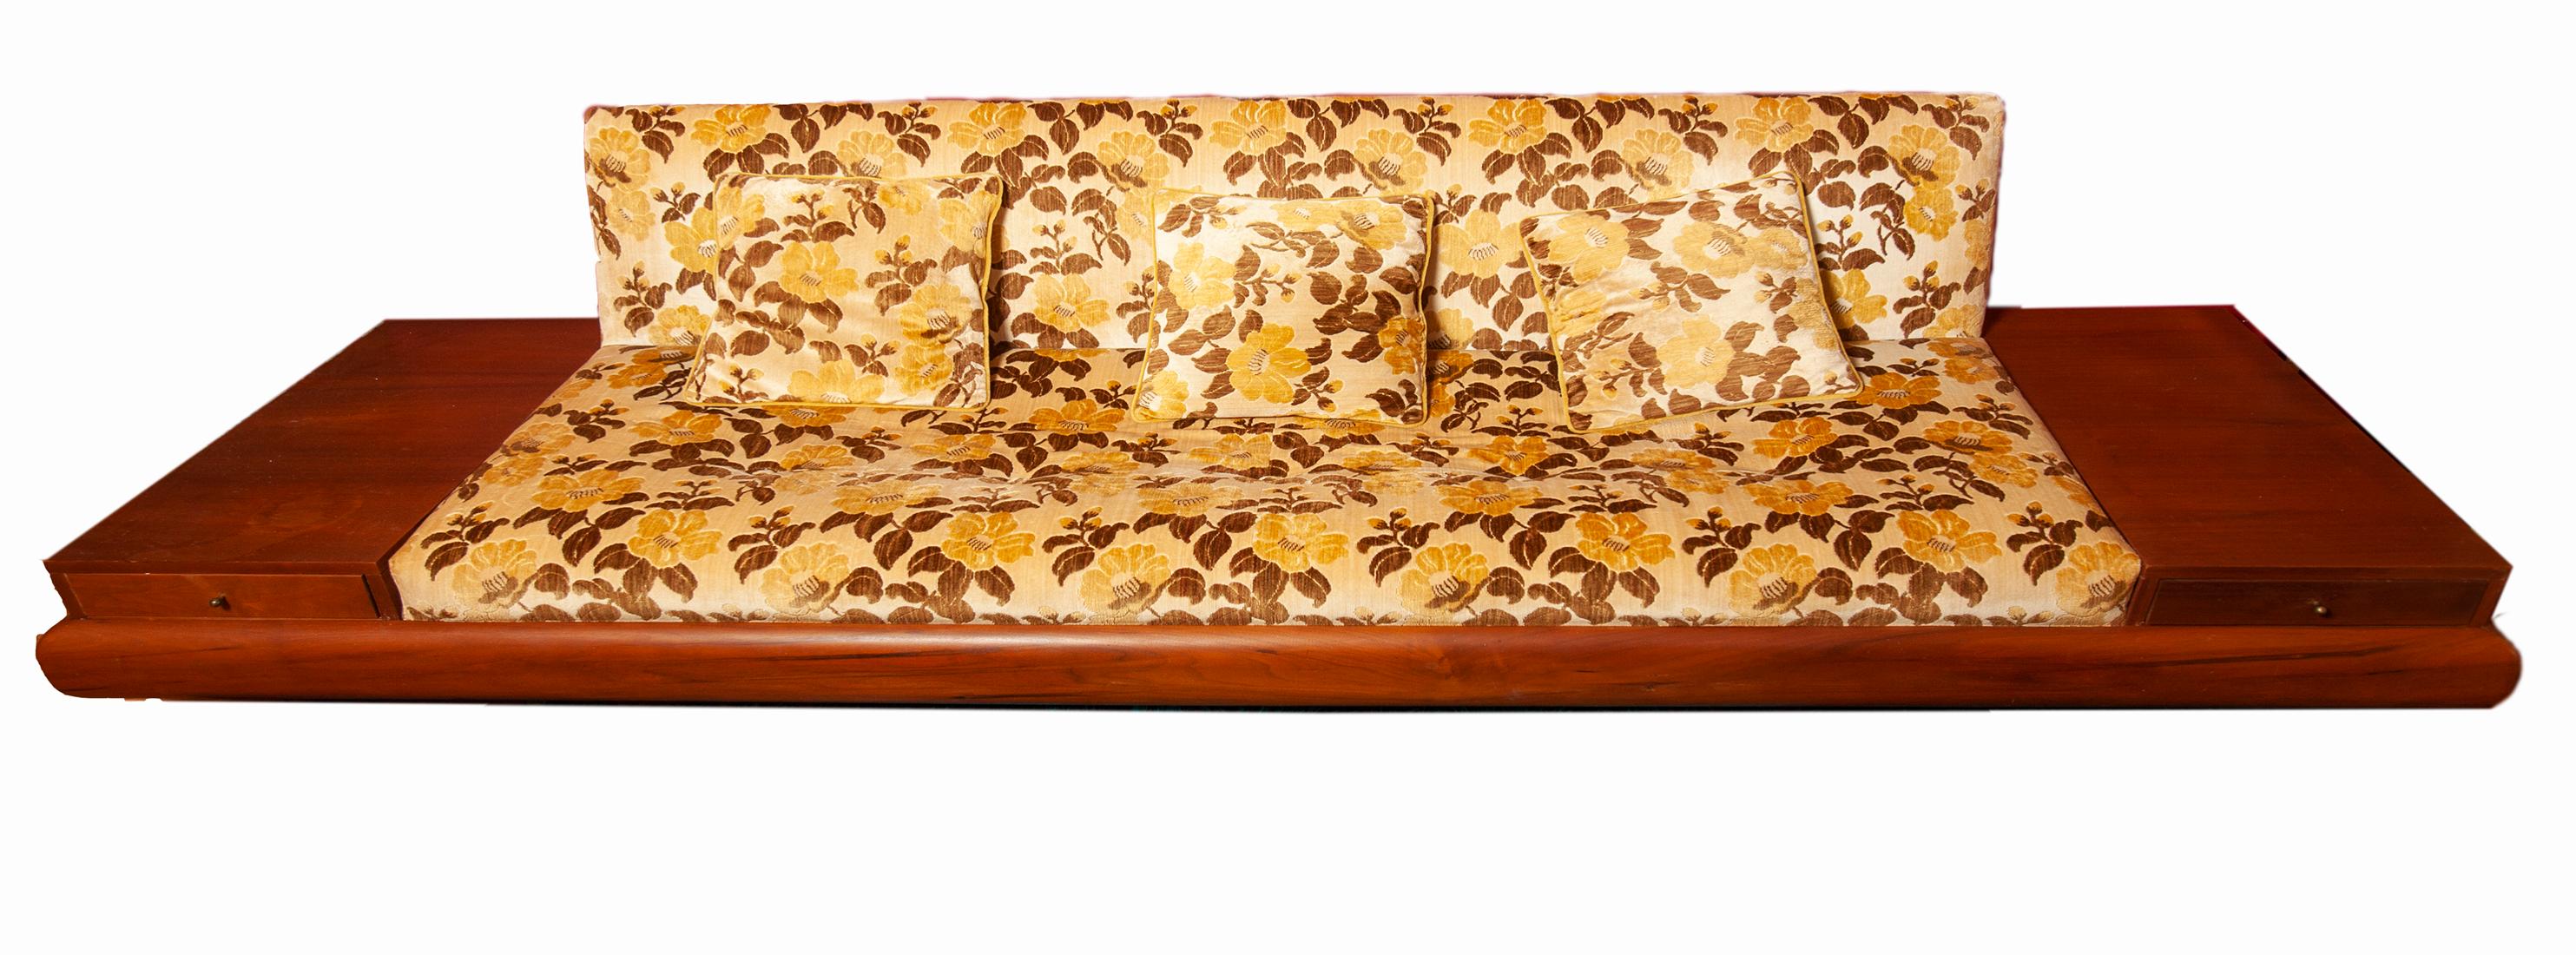 Woodwork Midcentury Adrian Pearsall Gondola Sofa Attached End Tables Original Fabric